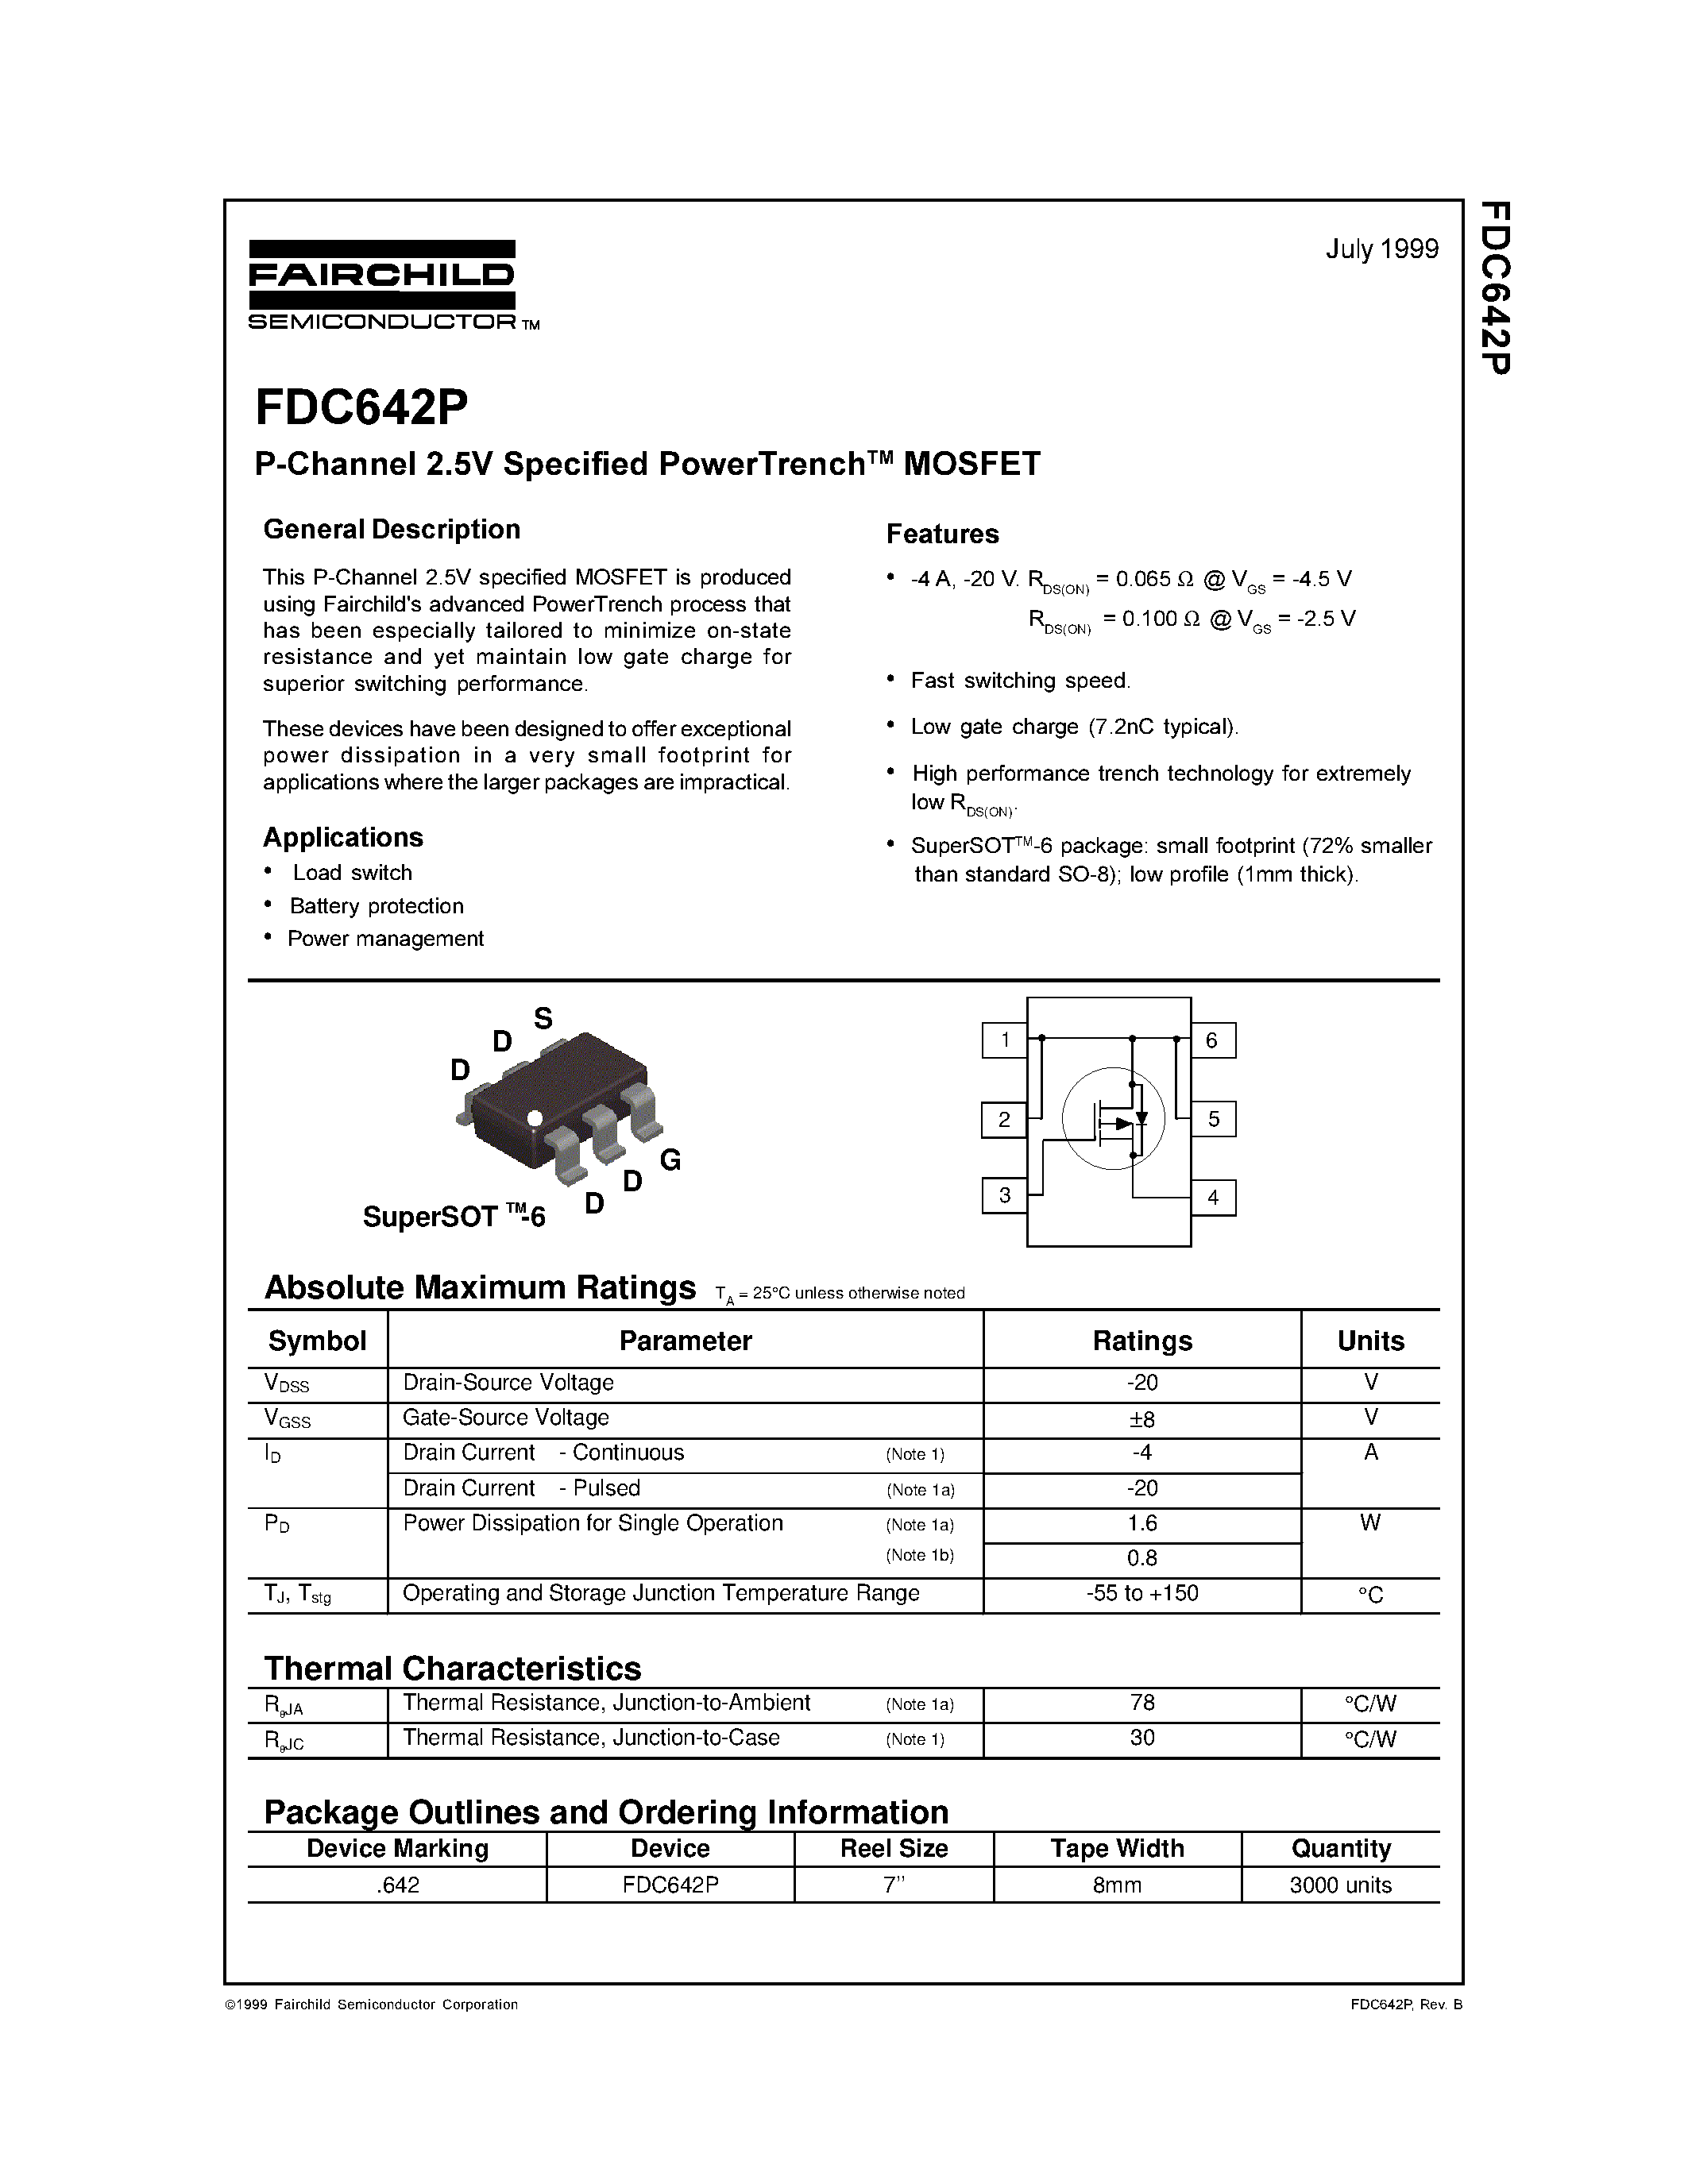 Datasheet FDC642 - P-Channel 2.5V Specified PowerTrenchMOSFET page 1